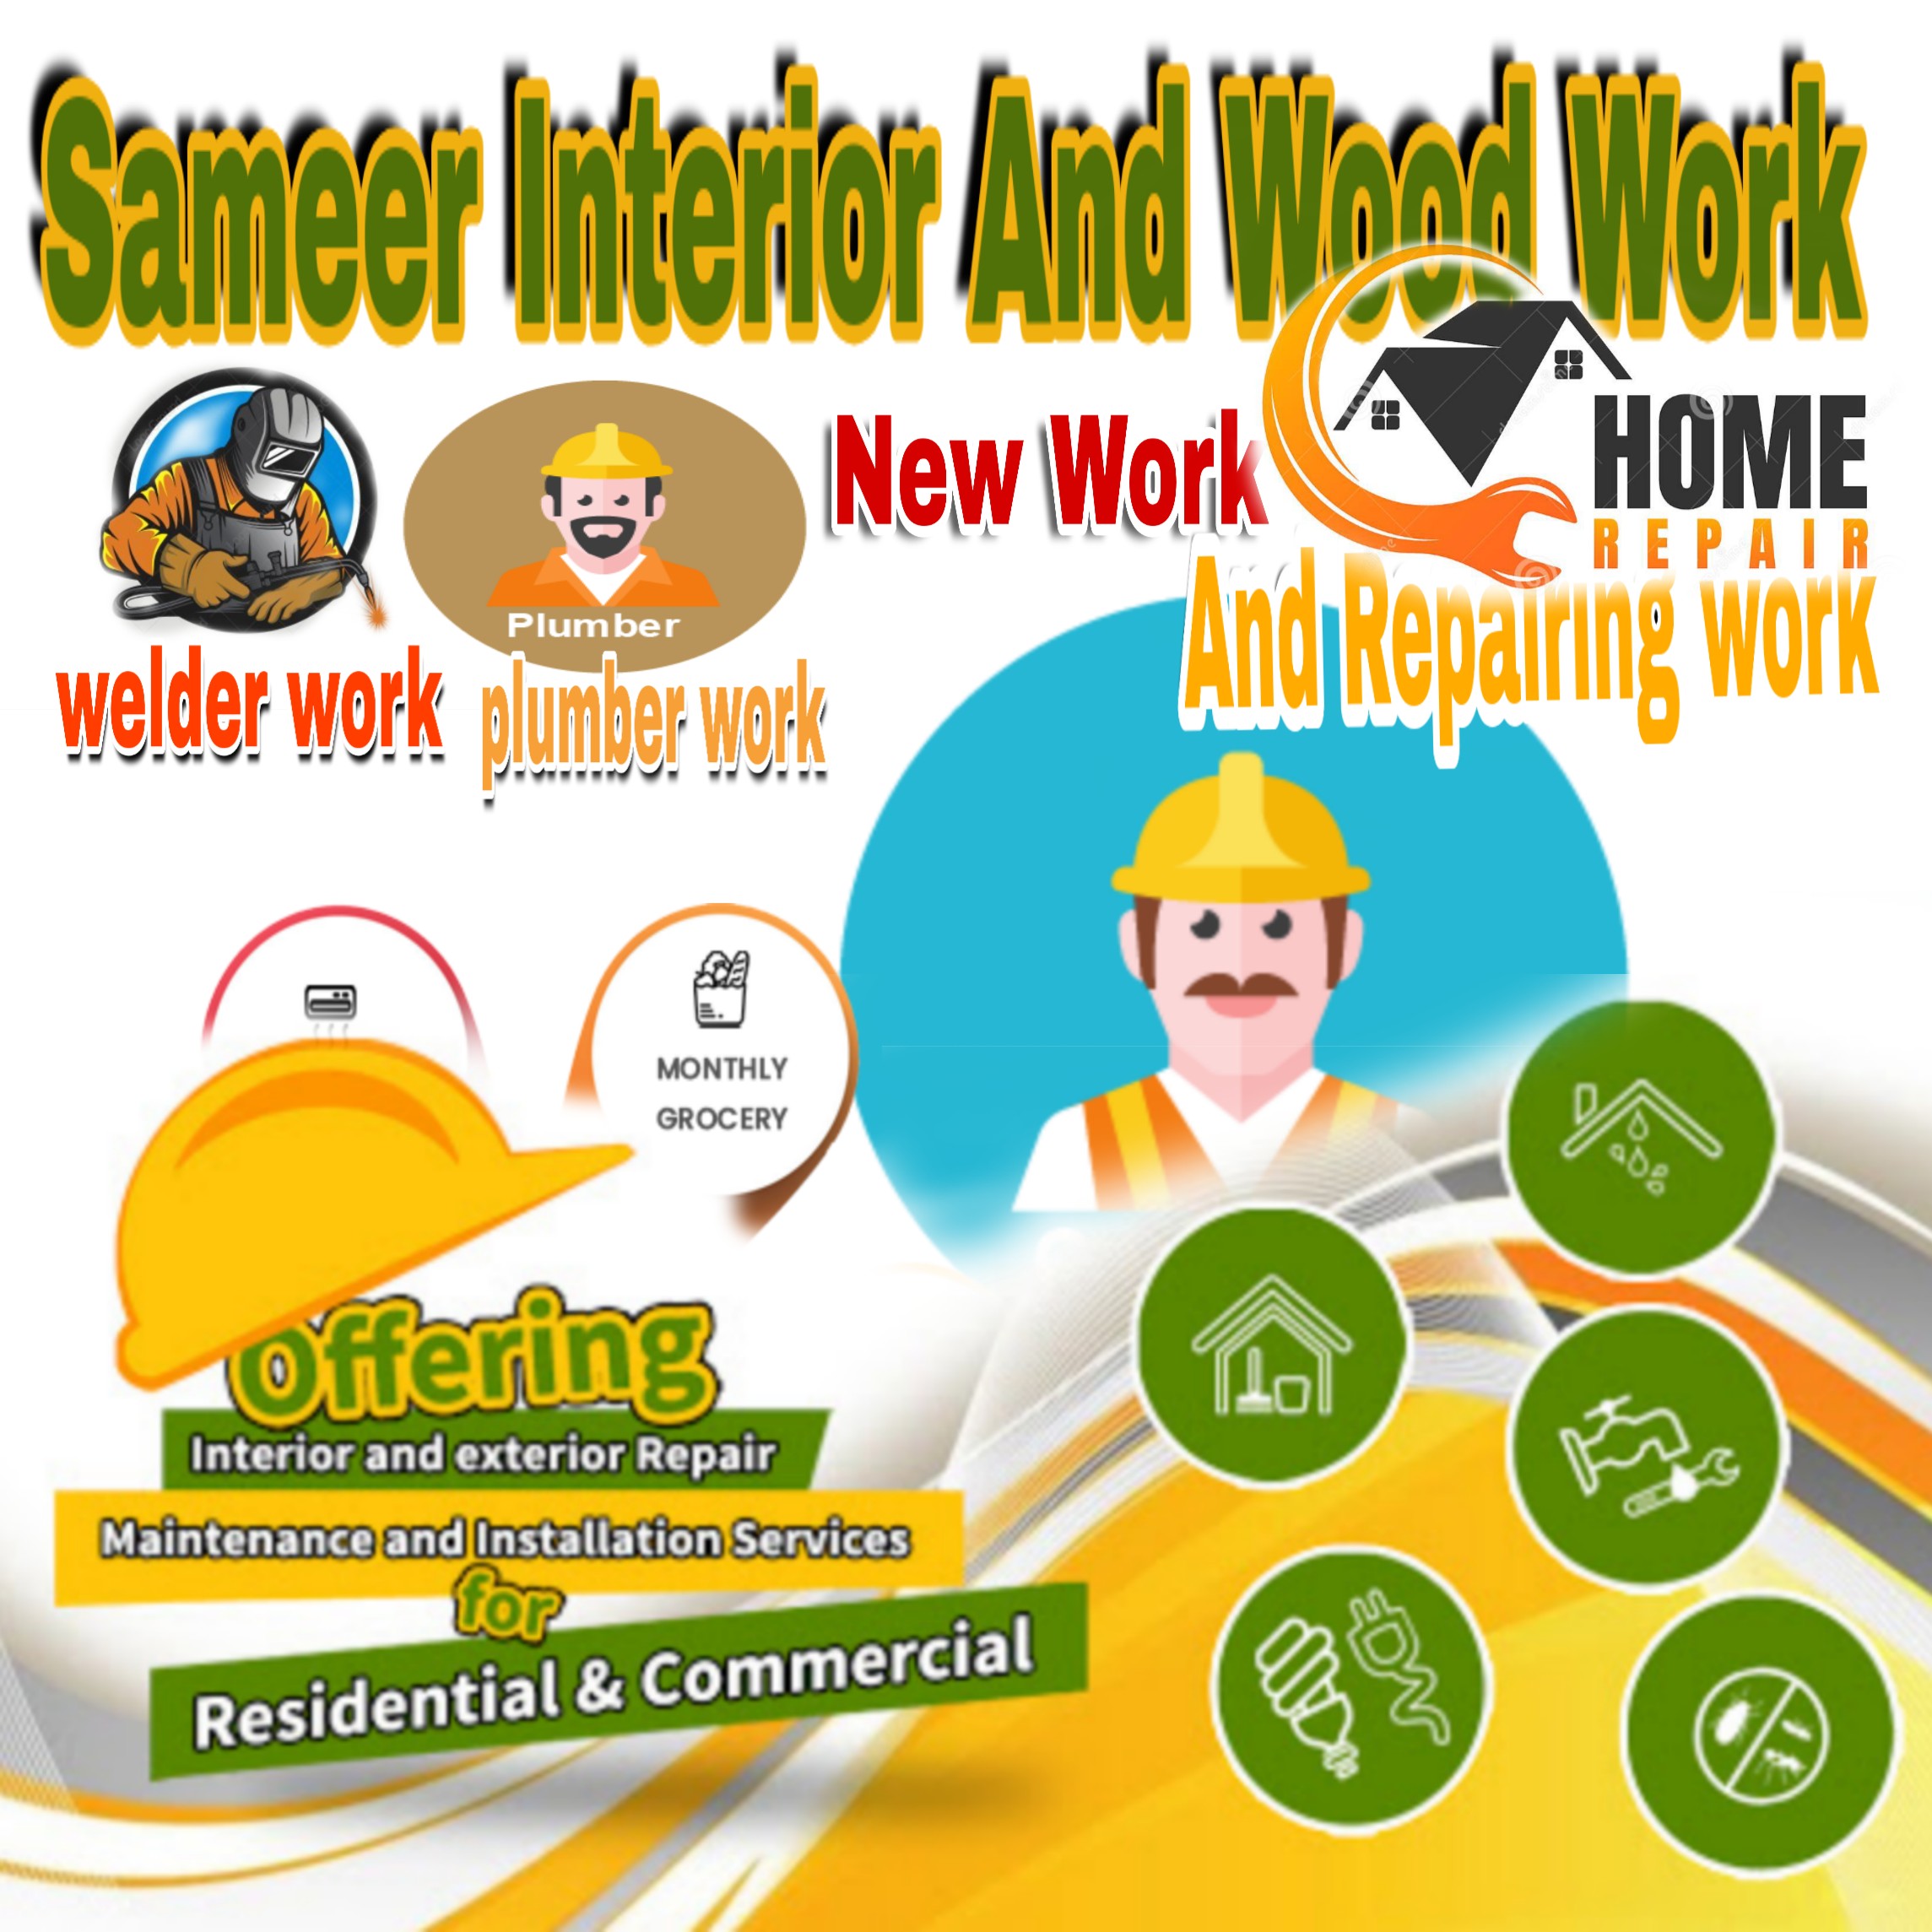 Sameer Interior And Wood Work in Agra